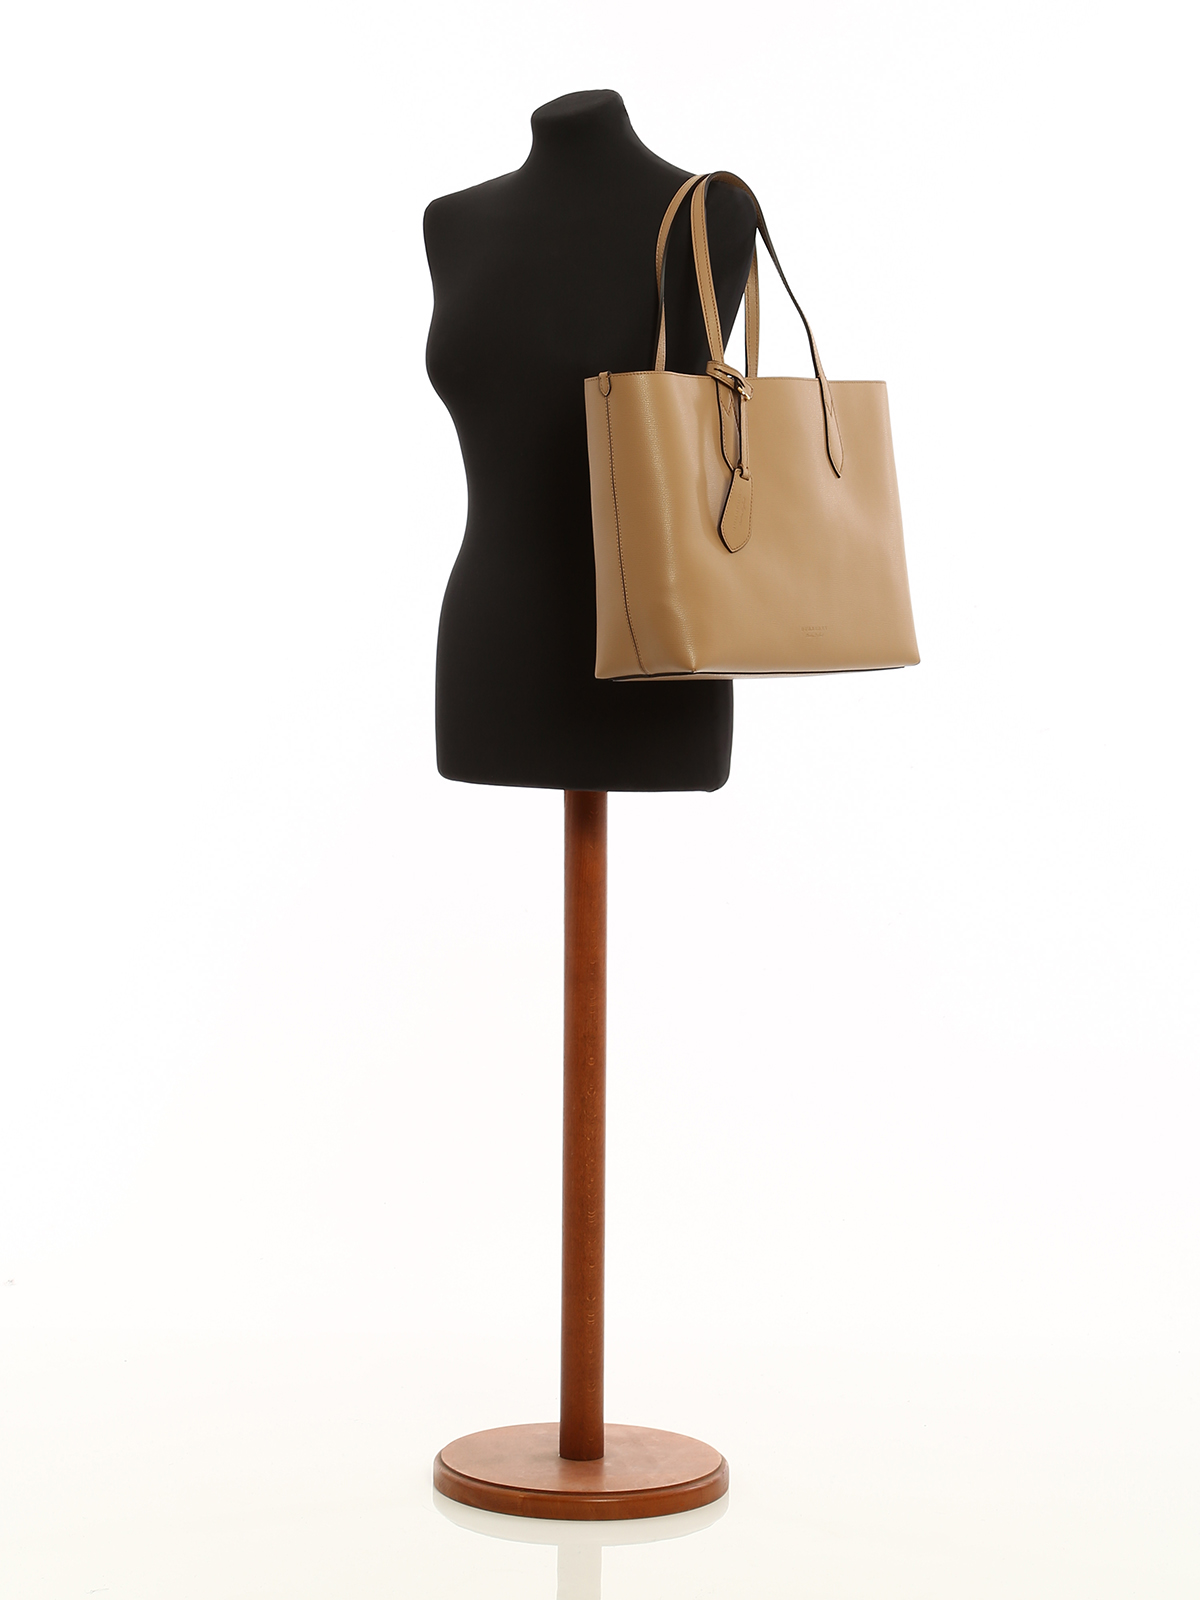 Burberry The Medium Reversible Tote In Haymarket Check And Leather